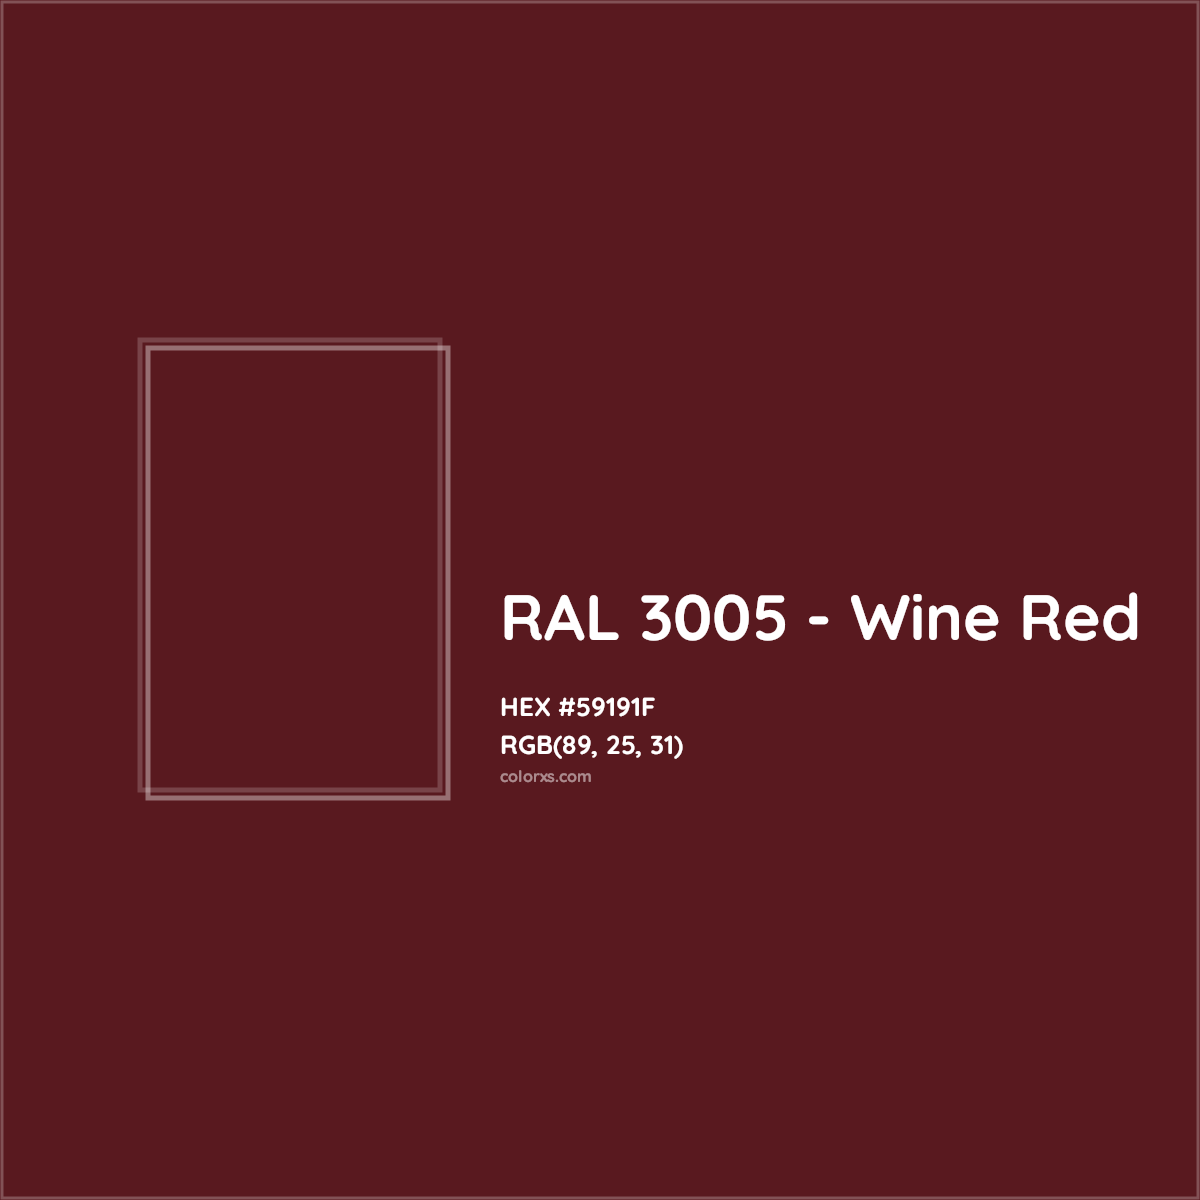 HEX #59191F RAL 3005 - Wine Red CMS RAL Classic - Color Code